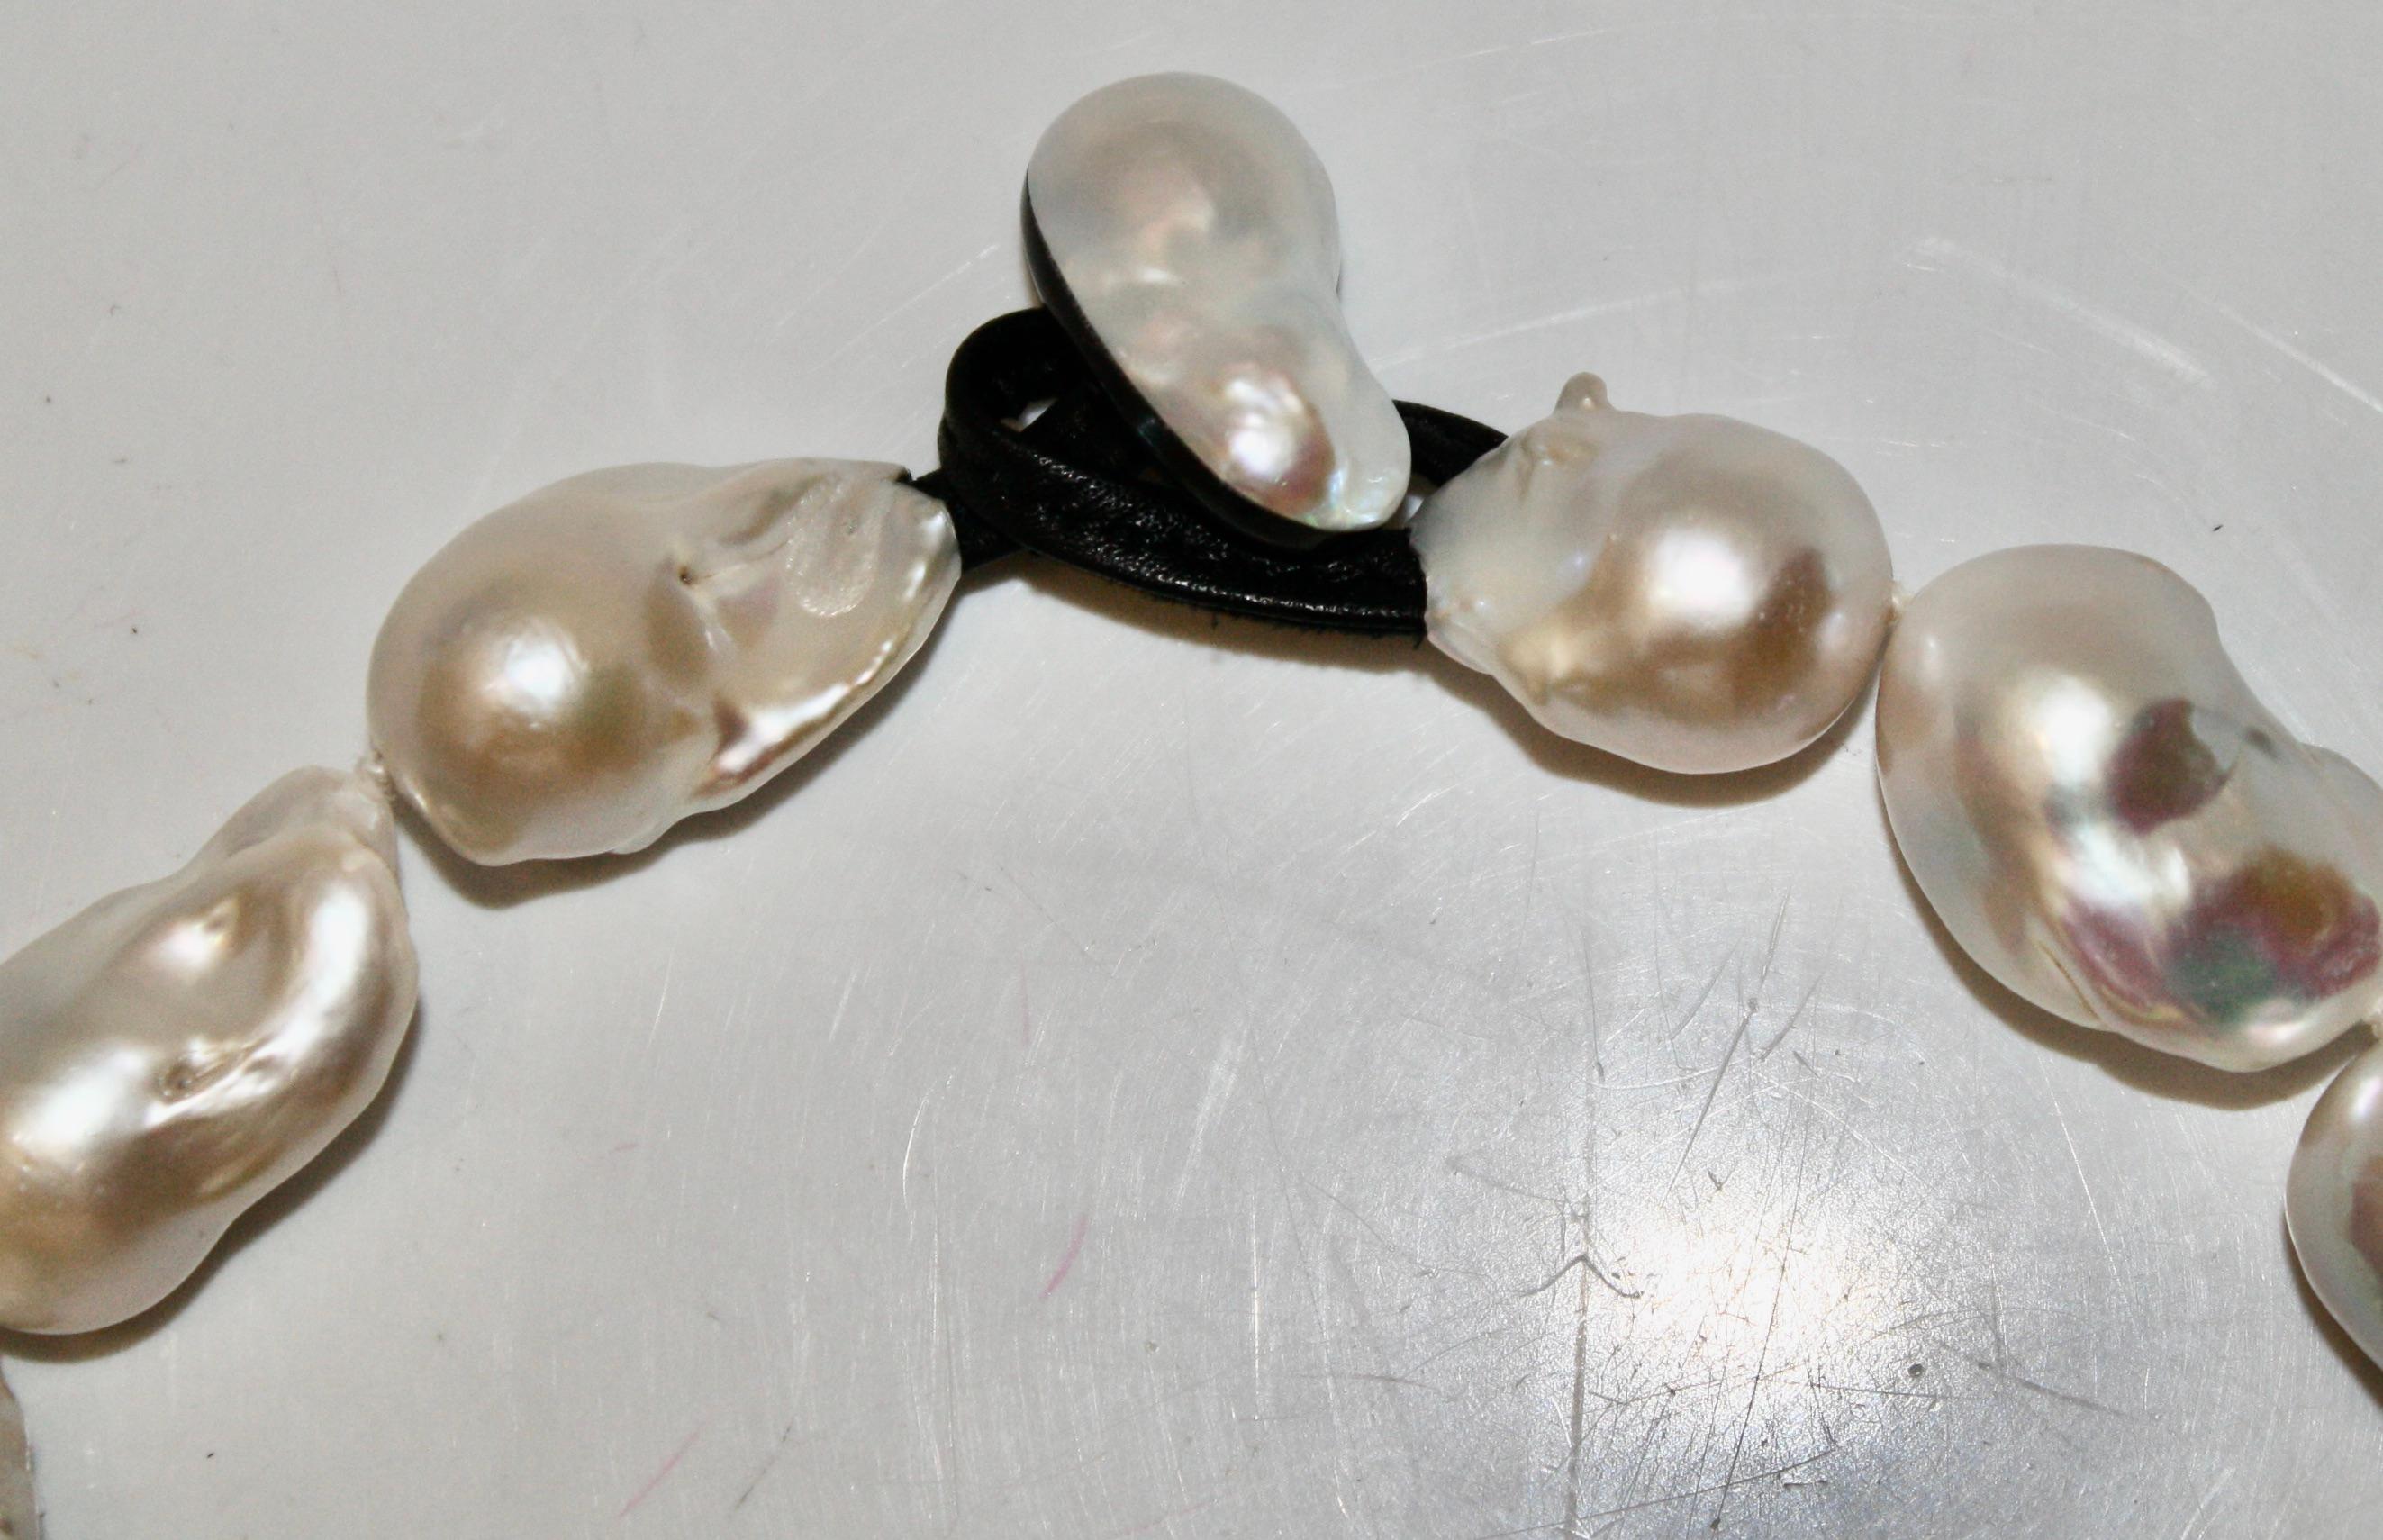 14 oversized baroque pearls knotted with a leather and ebony clasp. Signature on clasp. Pearl length vary from 1” to 1.5”.
MONIES IS A DANISH JEWELLERY COMPANY FOUNDED IN 1973 BY GERDA AND NIKOLAI MONIES. ALTHOUGH BOTH ARE CLASSICALLY TRAINED